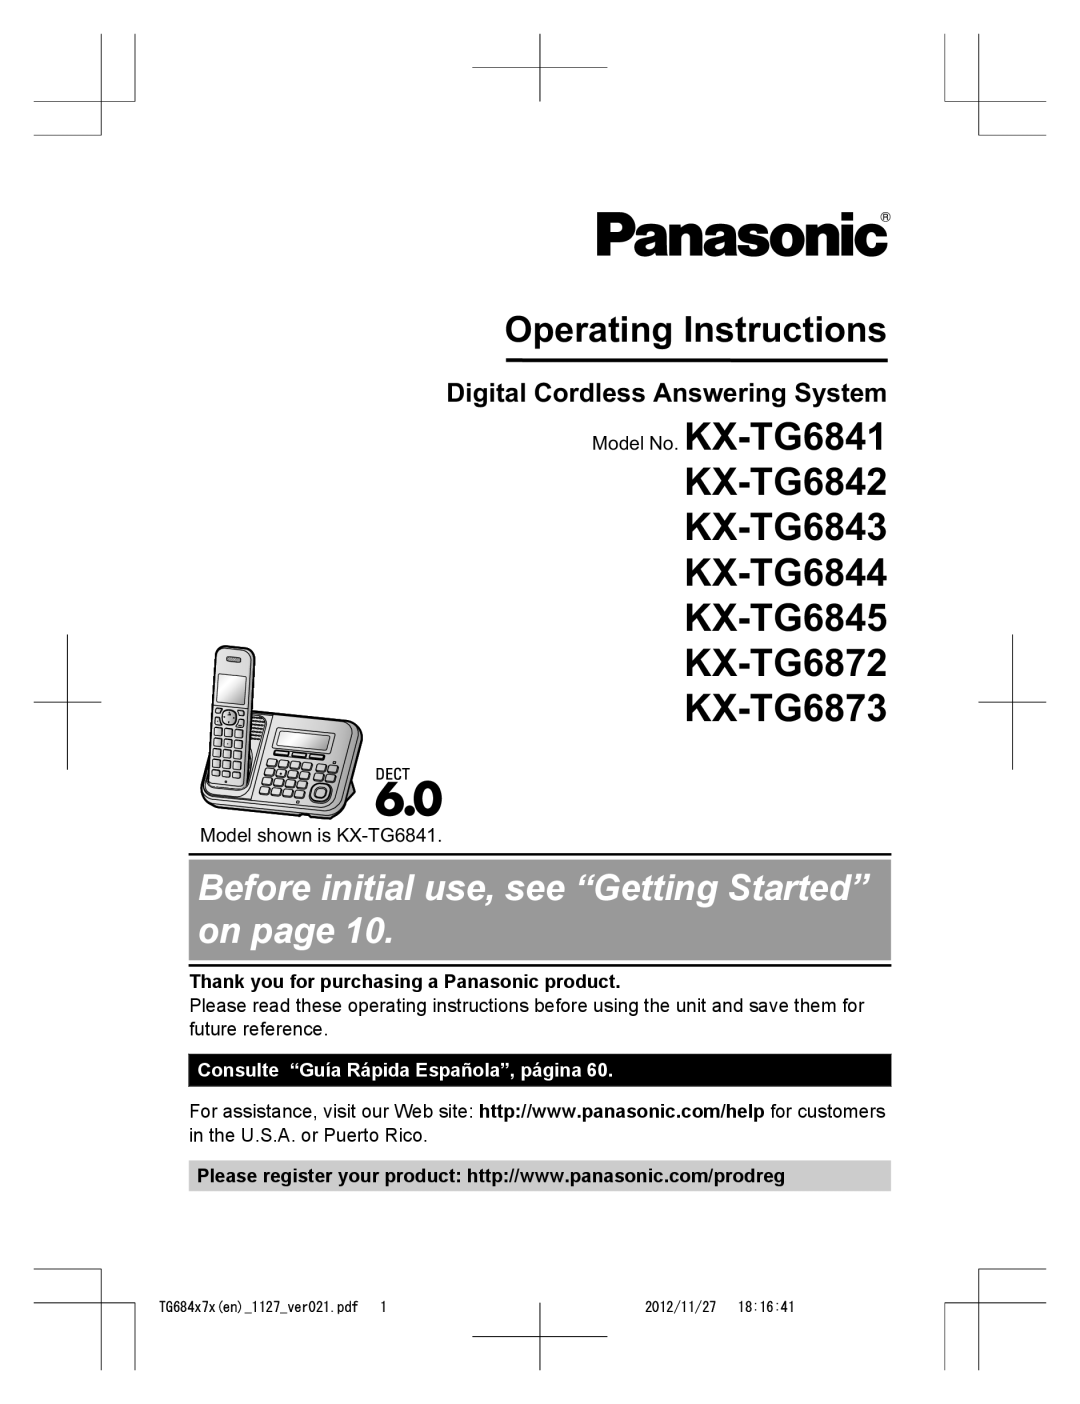 Panasonic KX-TG6872 operating instructions Digital Cordless Answering System, Thank you for purchasing a Panasonic product 